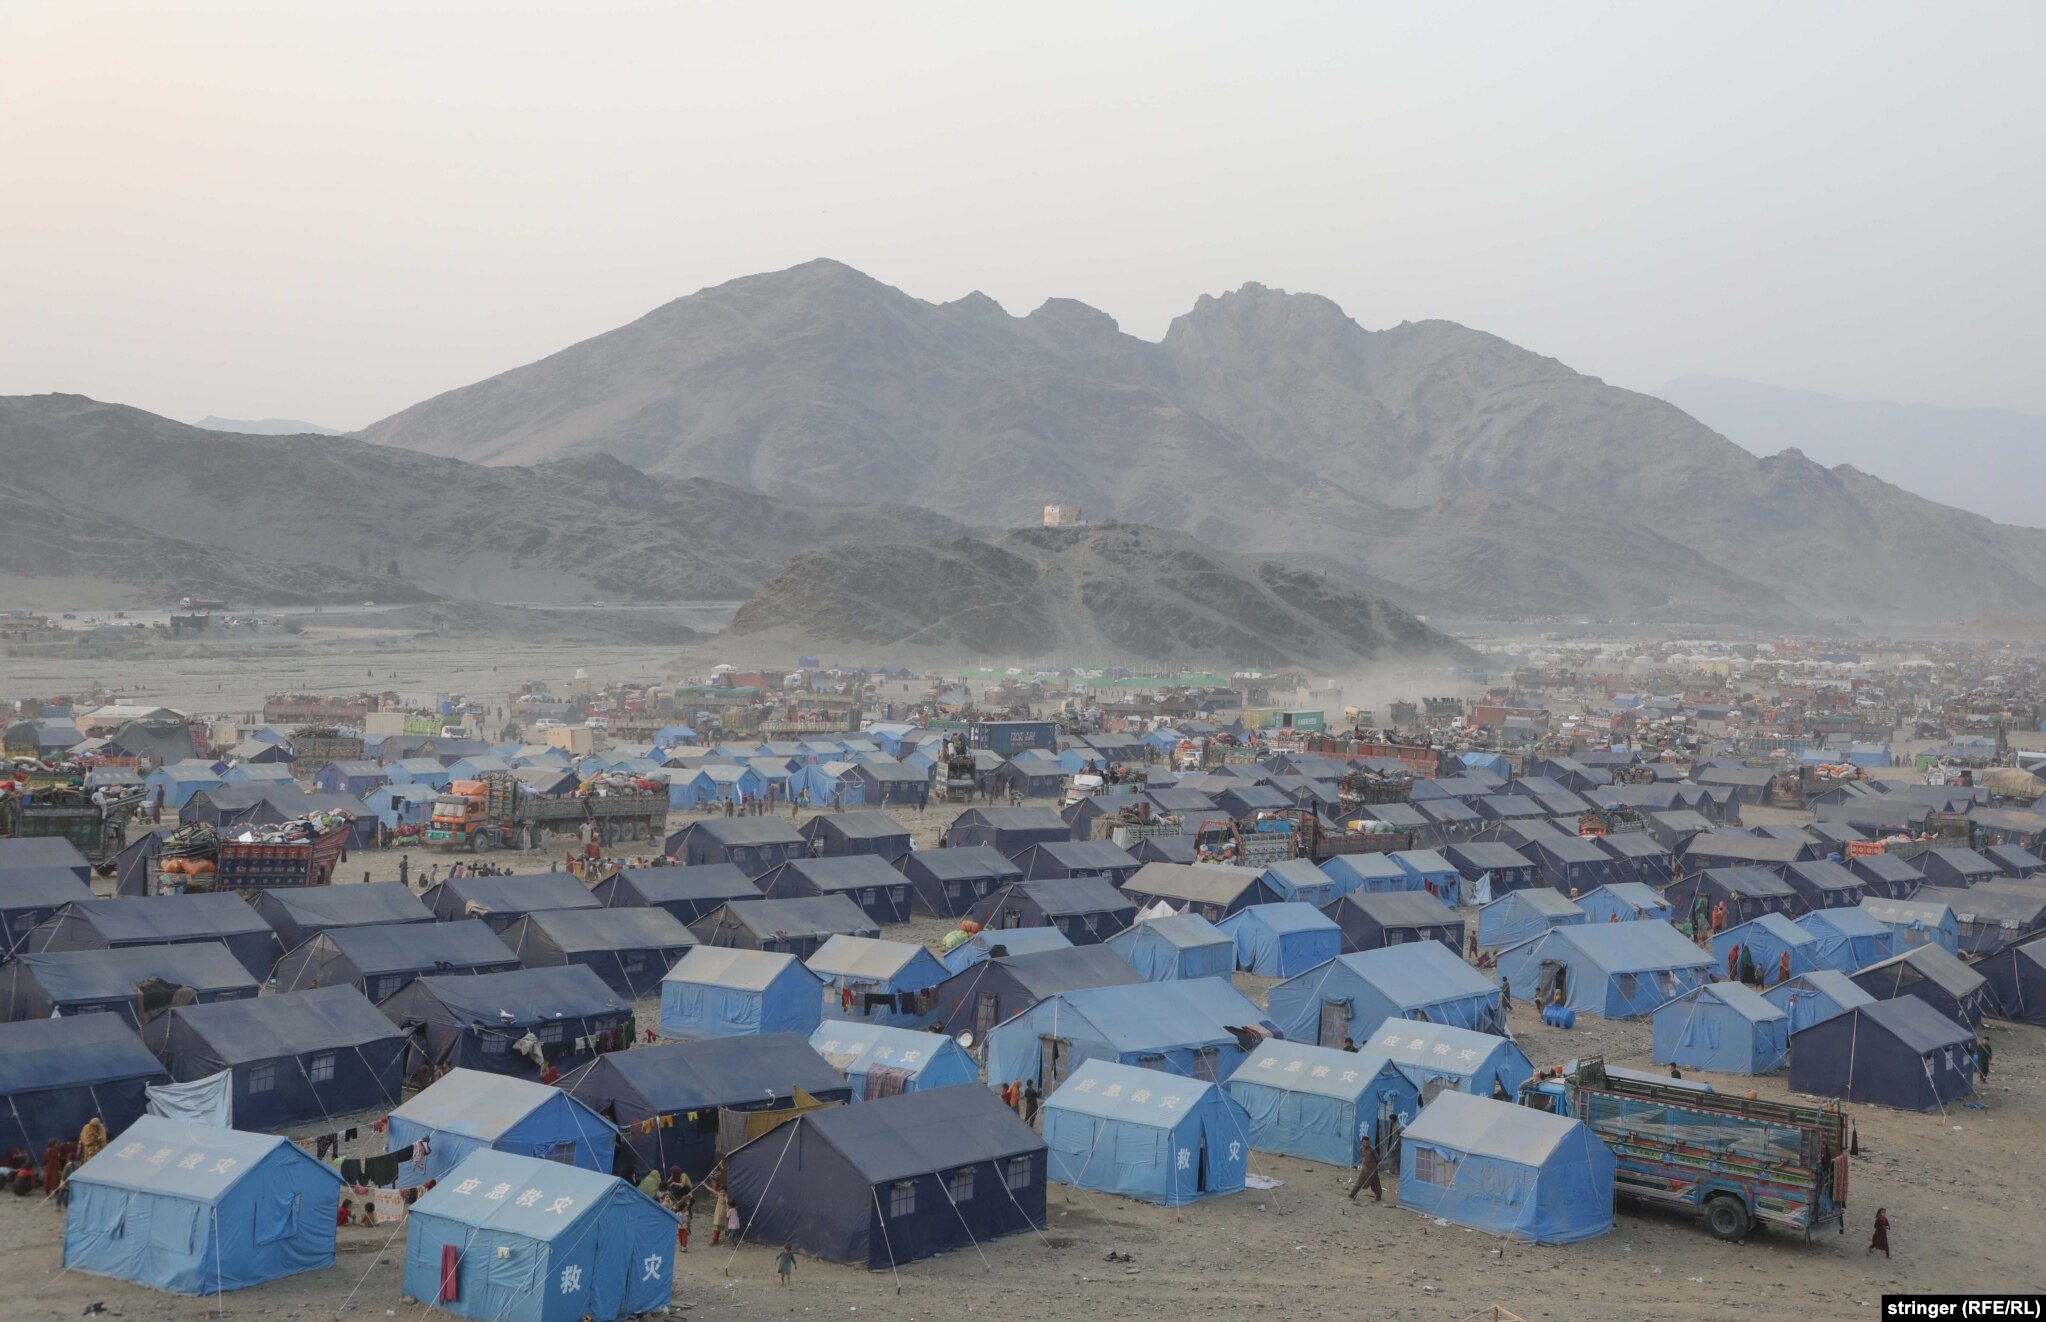 Tents on the Afghanistan side of the Torkham border crossing. The UN estimates that over 29 million Afghans -- out of a population of around 40 million -- need humanitarian assistance.